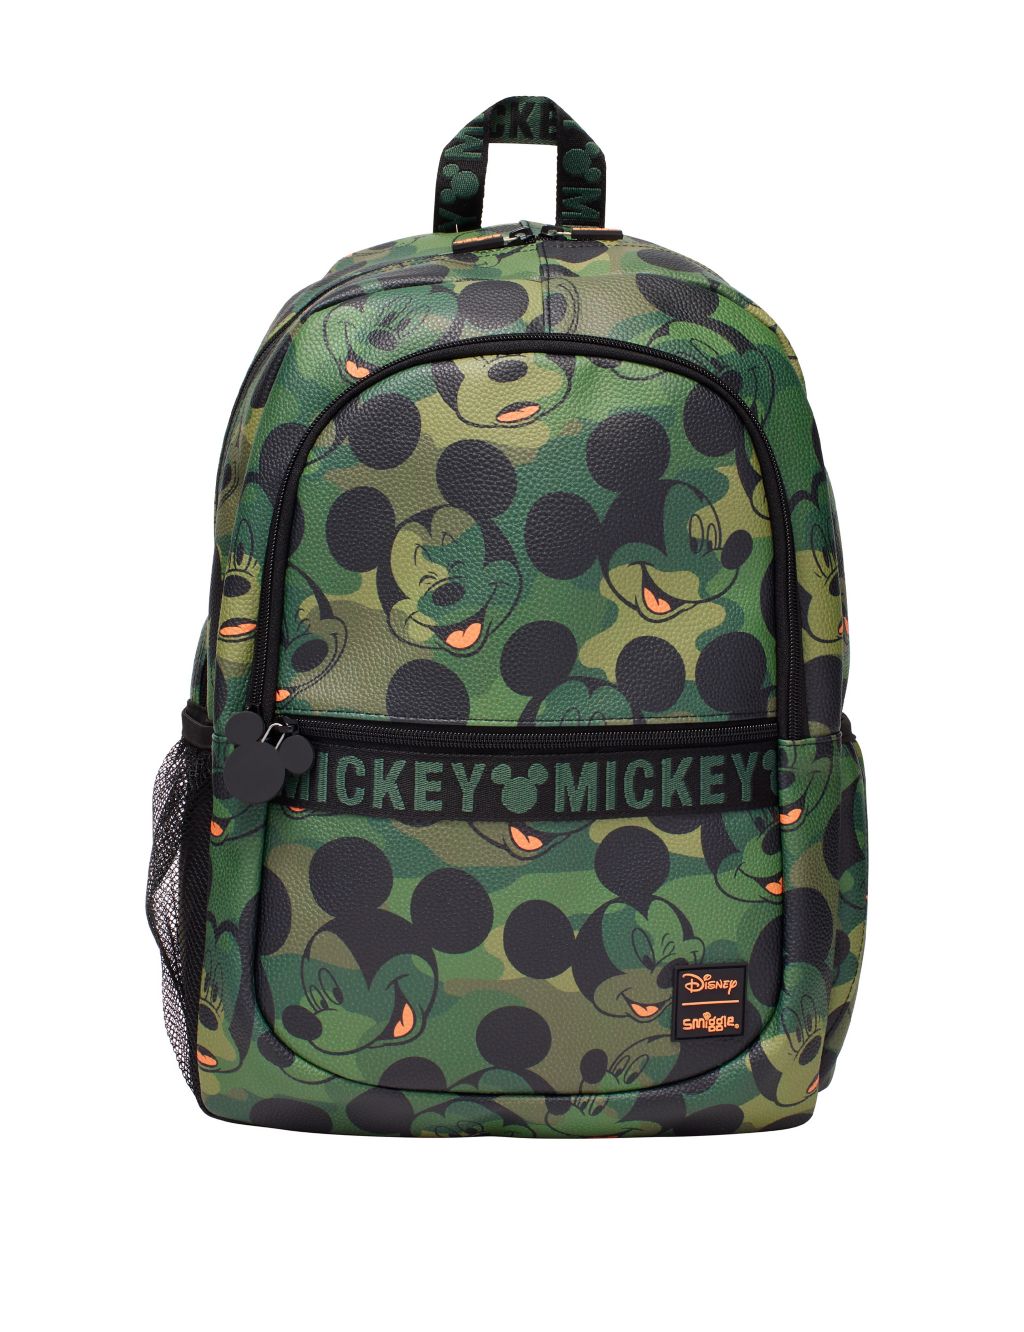 Kids' Mickey Mouse™ School Backpack image 1